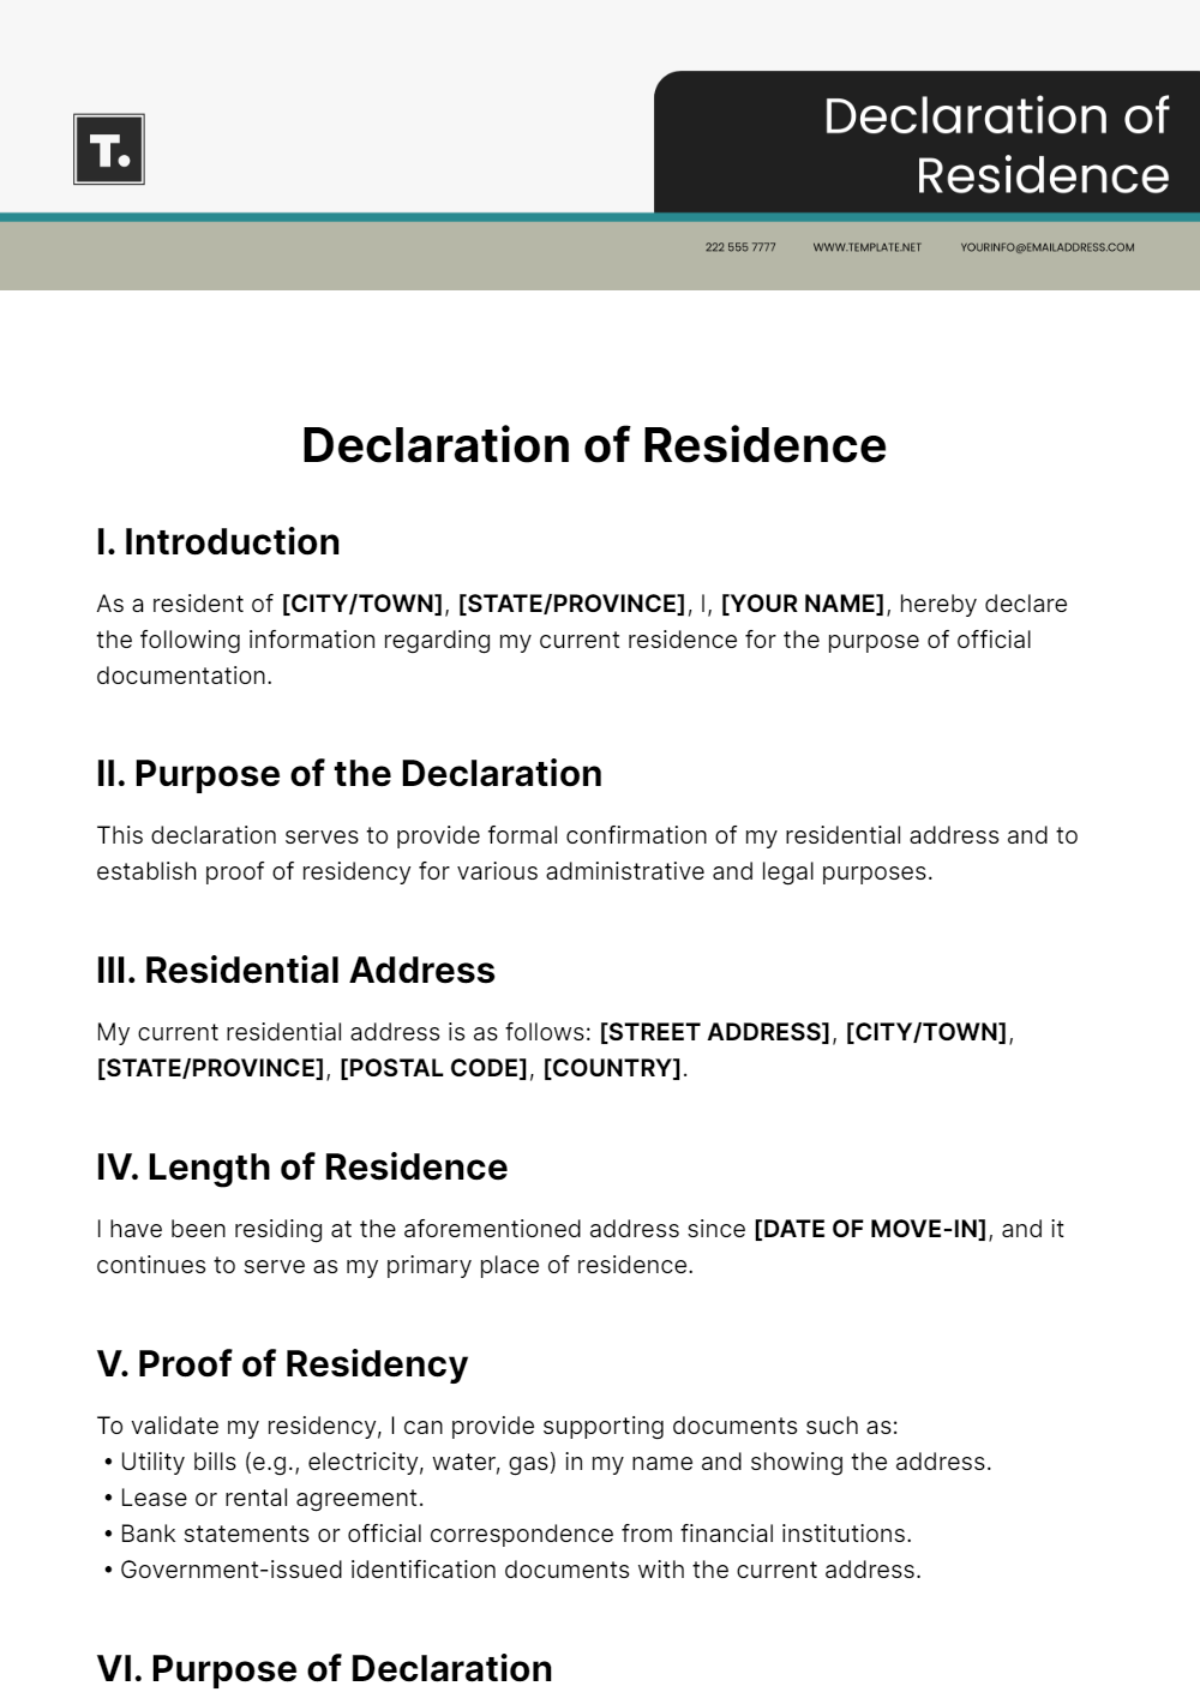 Free Declaration of Residence Template